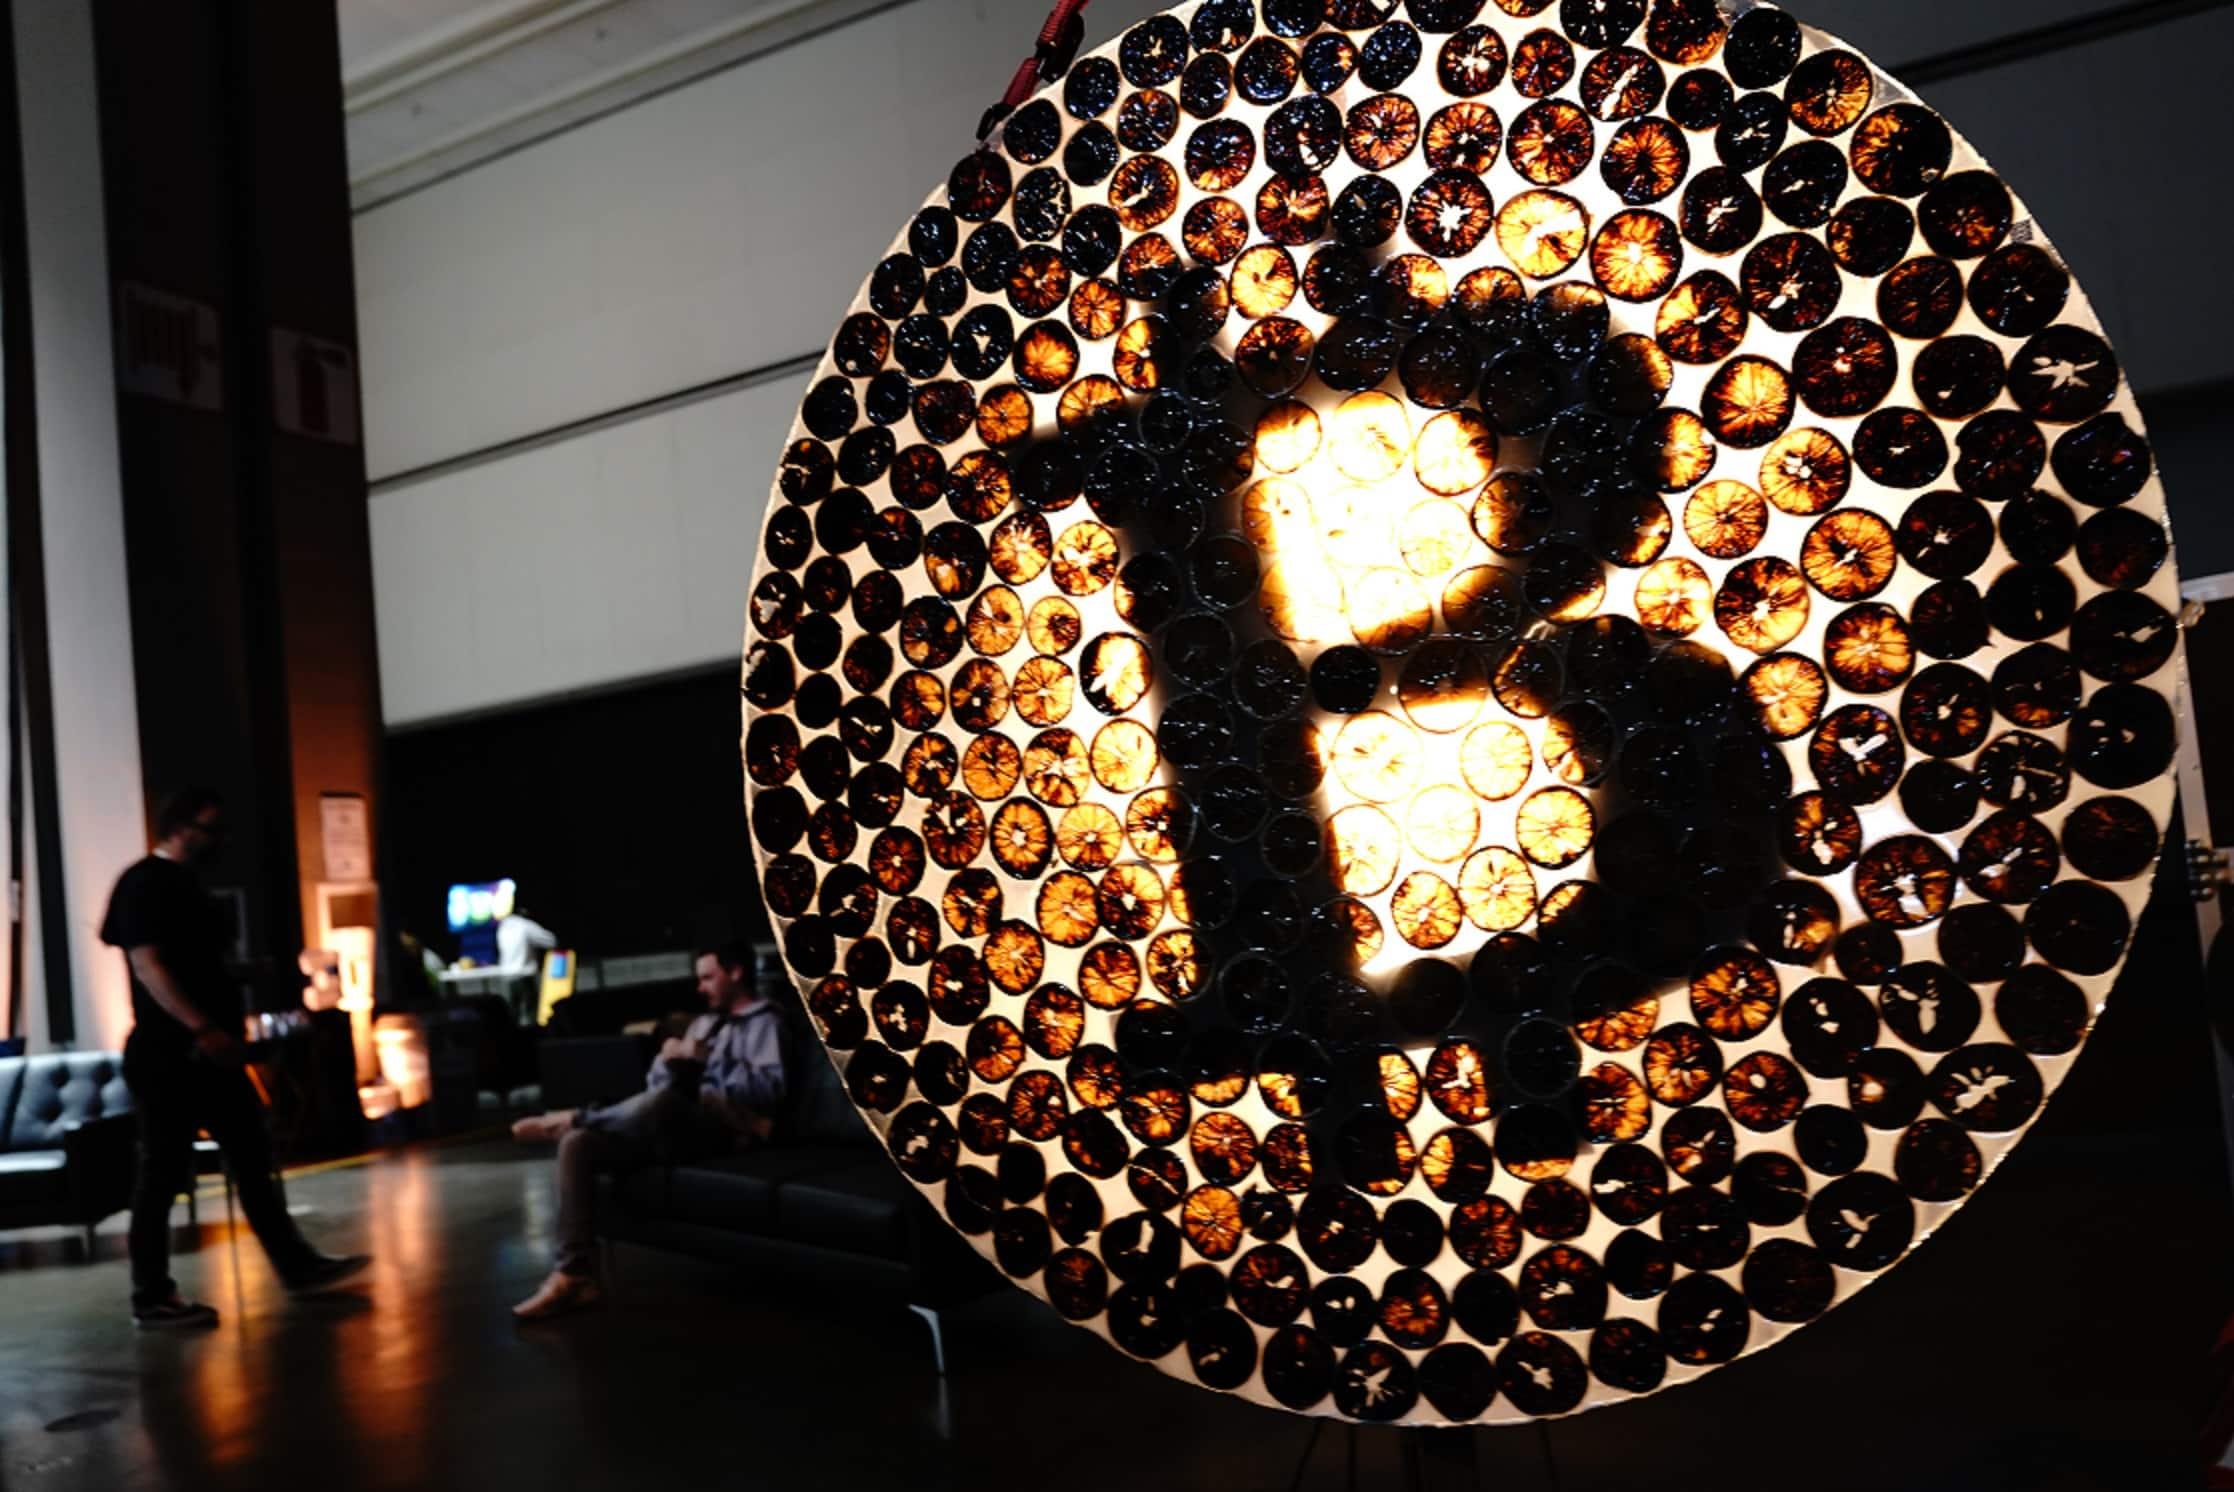 Bitcoin lost 34 percent from $47,345 on January 2 to $31,300 on May 15, as per CoinMarketCap data. Photo: Blooomberg